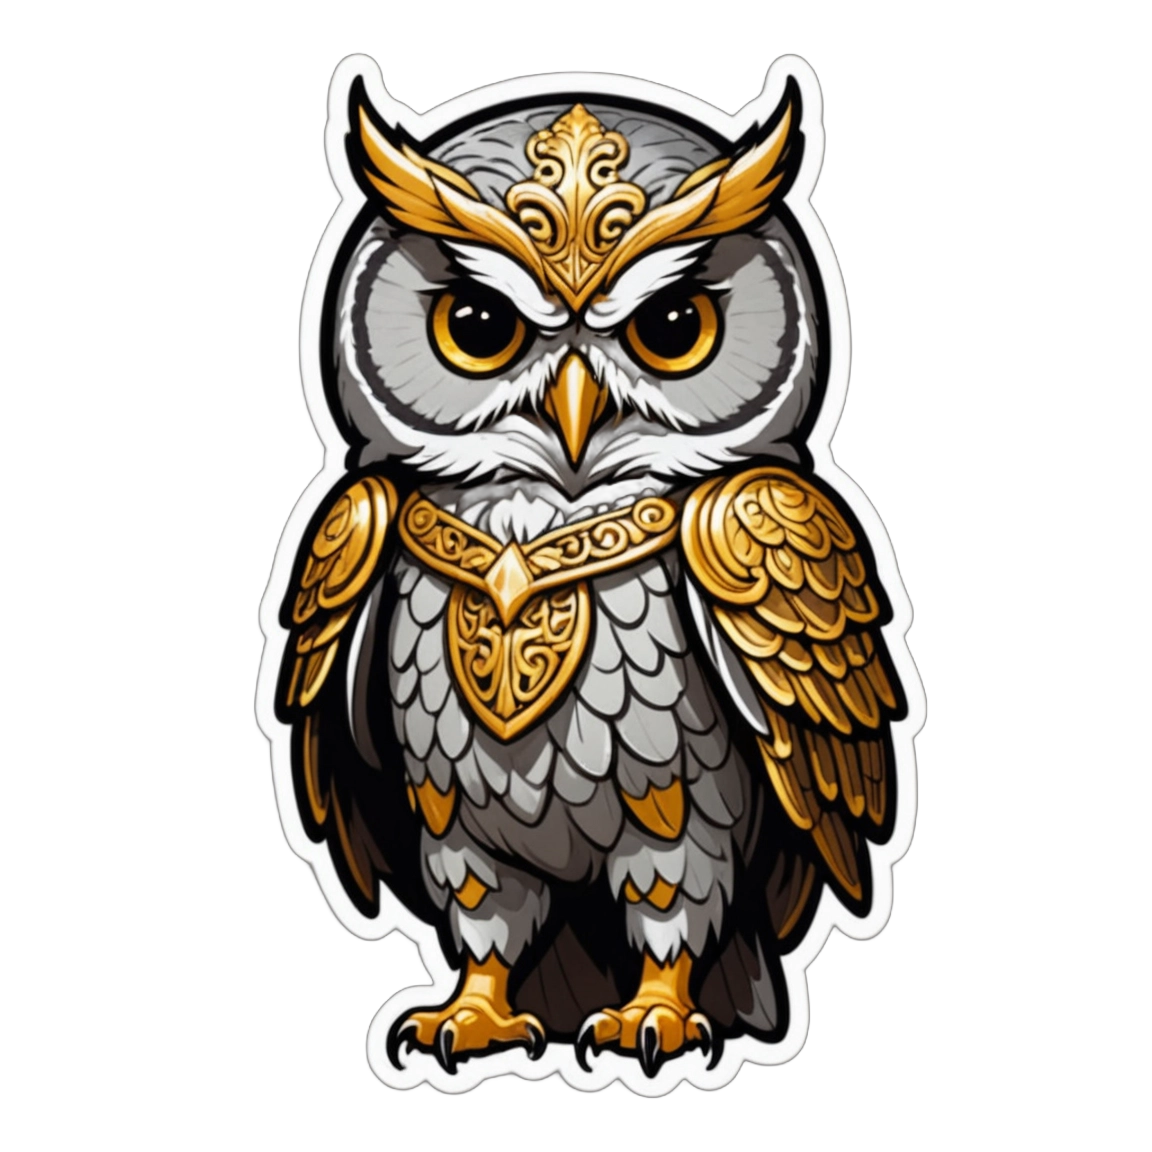 An owl as a medieval warrior, fashioned with golden ornaments